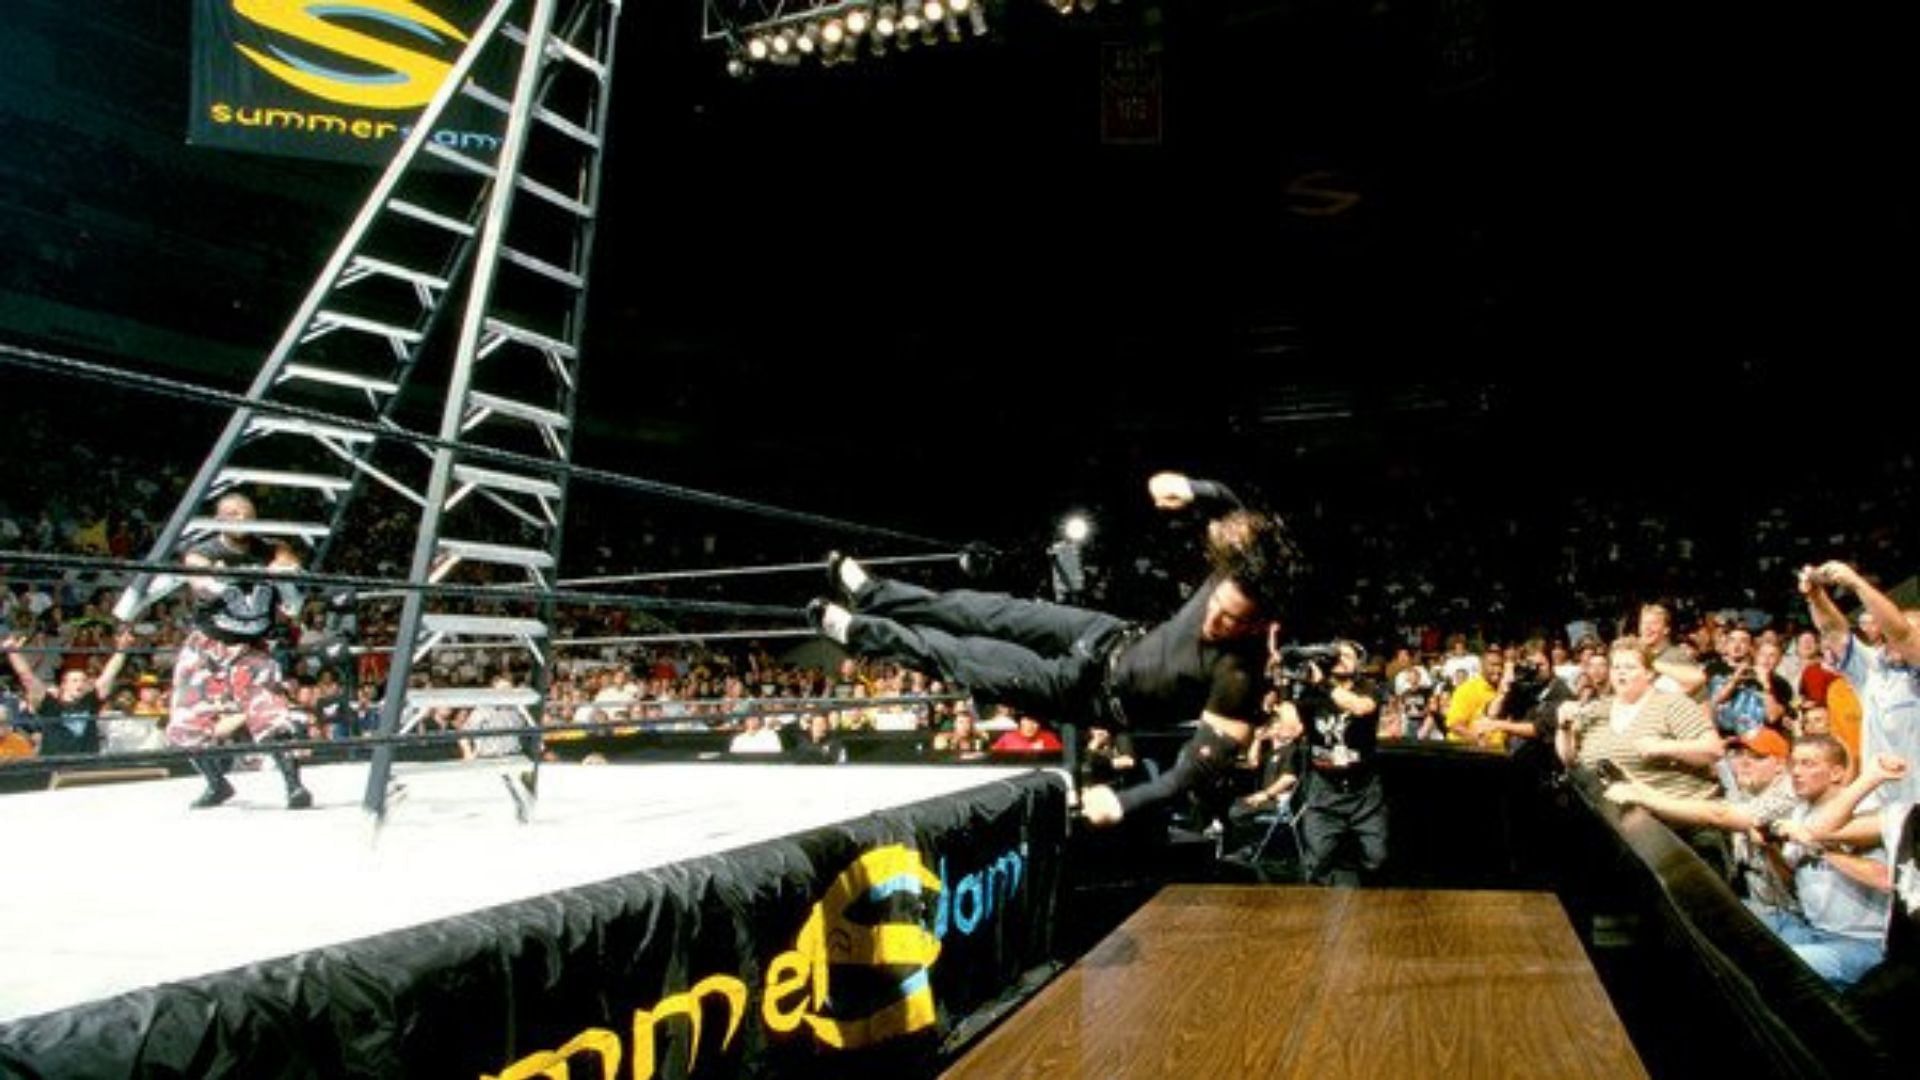 Matt Hardy competing in the first TLC match in 2000